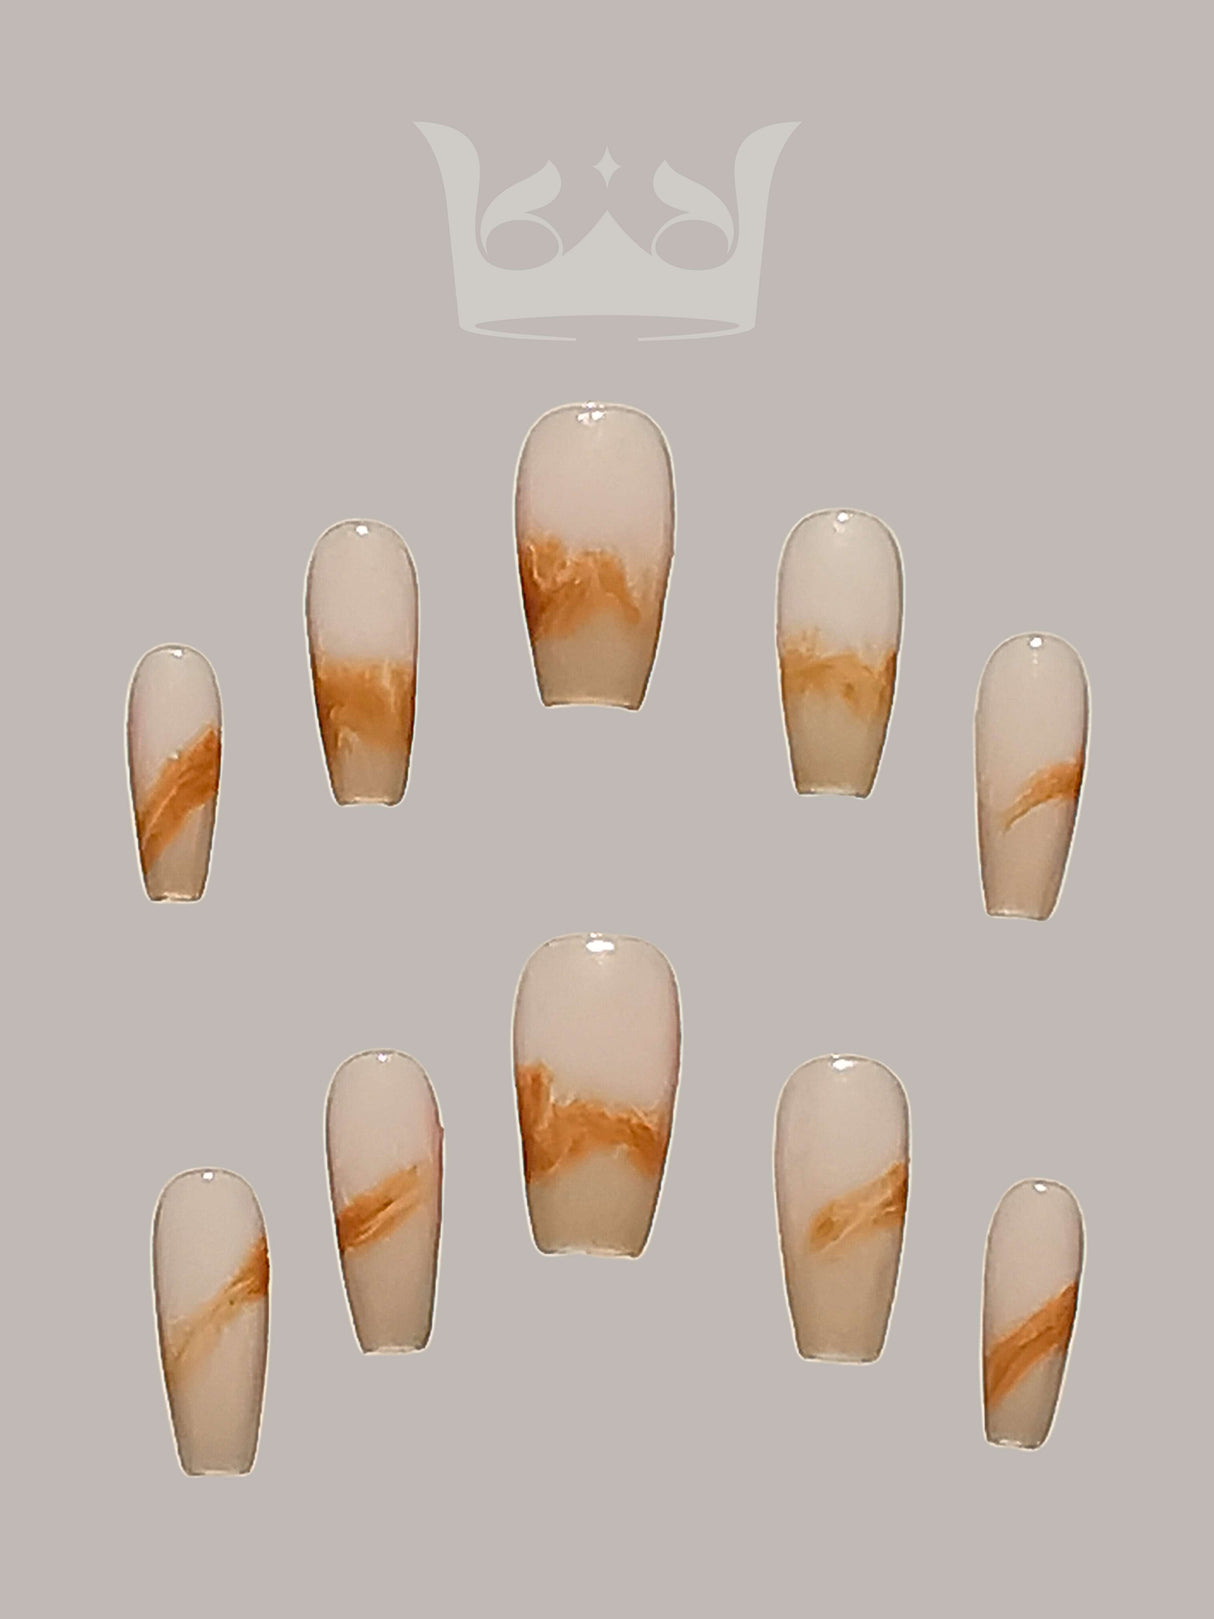 These press-on nails are for cosmetic purposes, with a unique and artistic design including a natural base color, swirls of brown or amber,.They add elegance to any manicure.